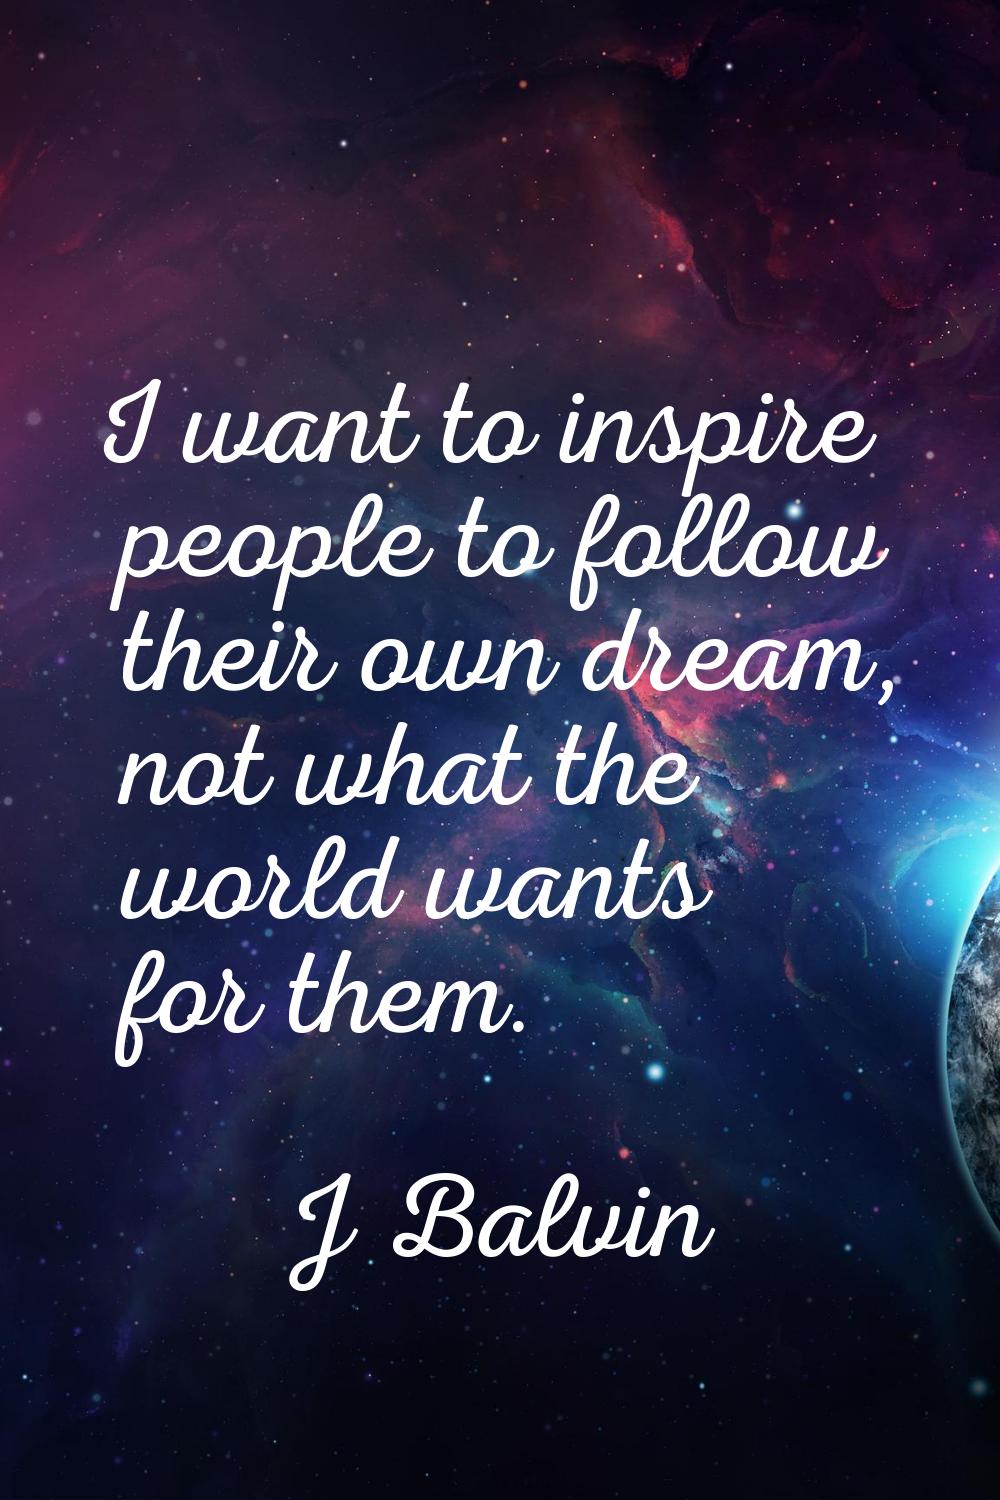 I want to inspire people to follow their own dream, not what the world wants for them.